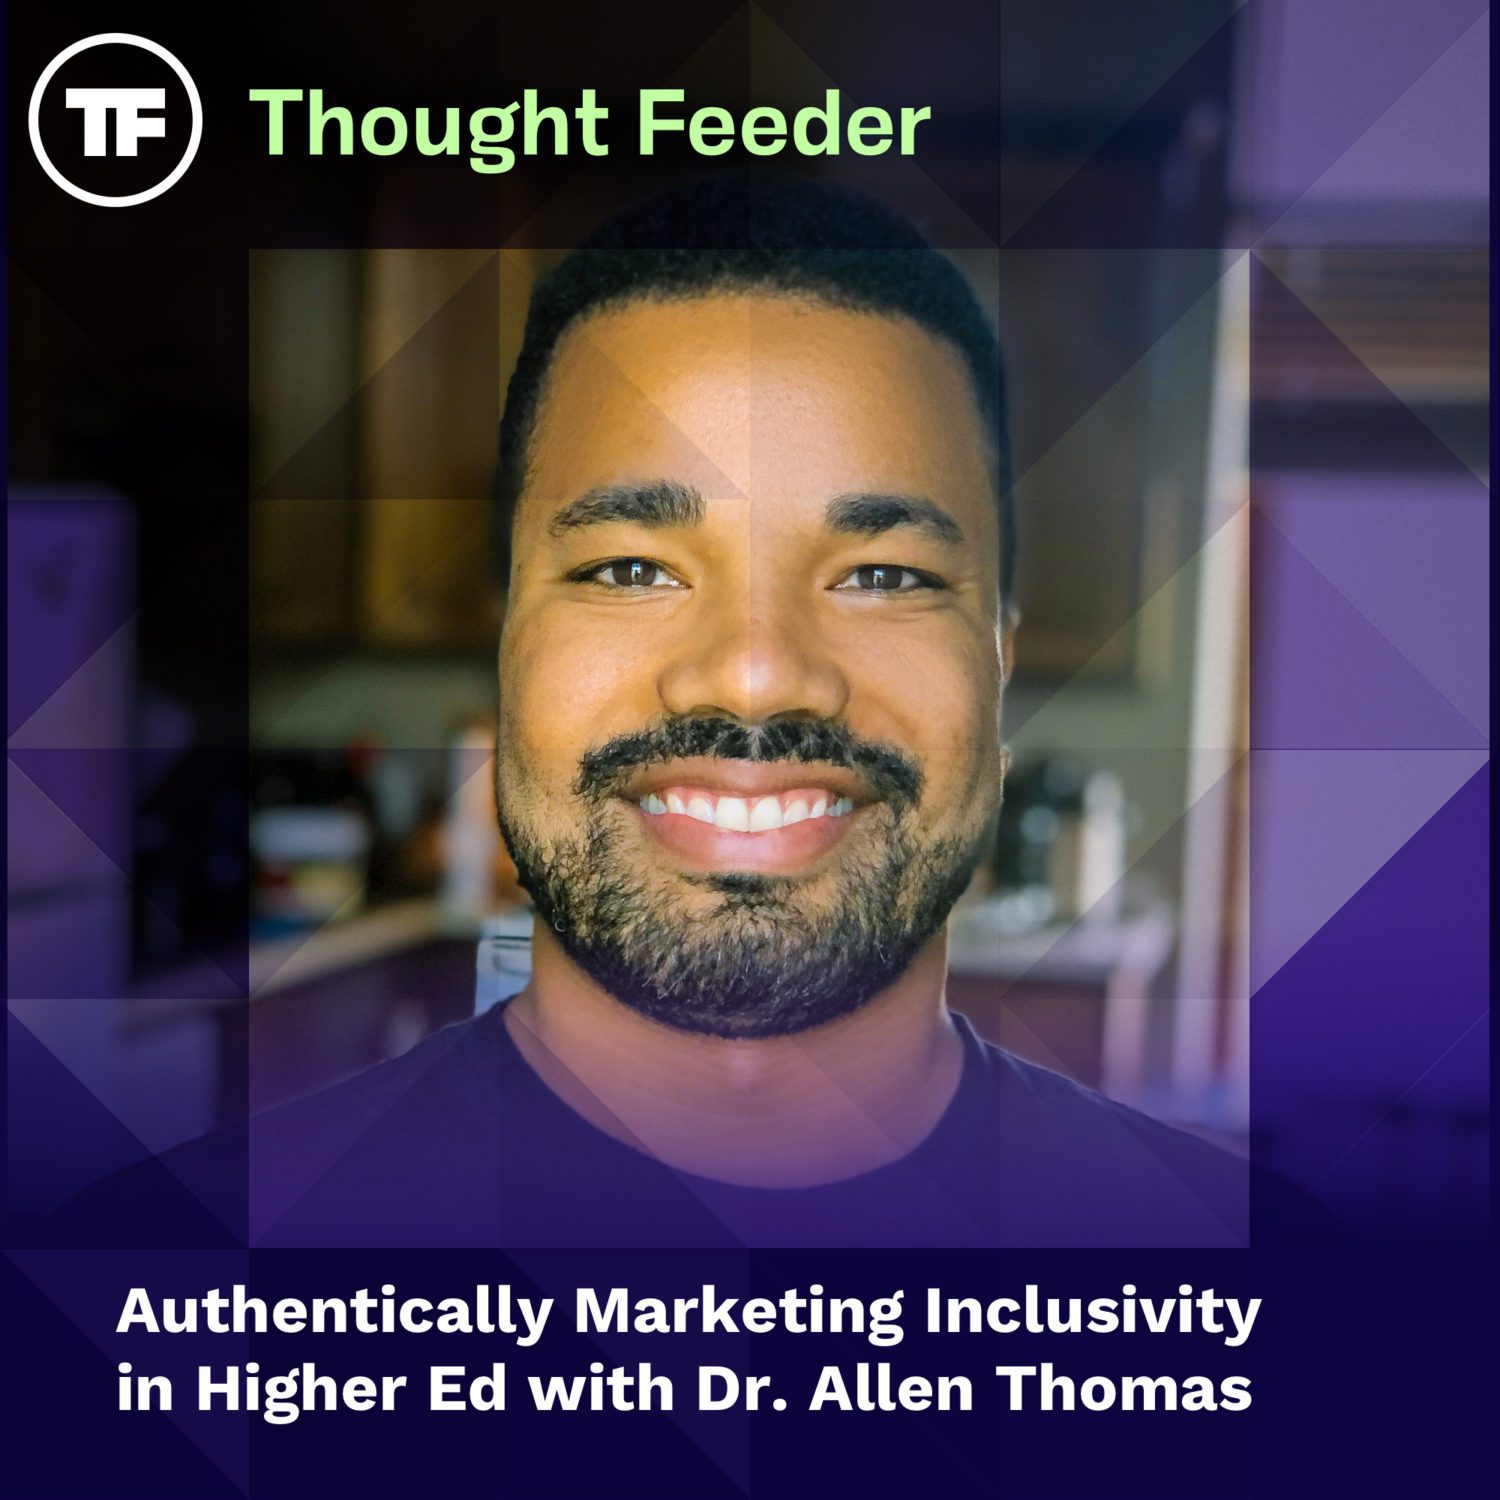 Authentically Marketing Inclusivity in Higher Ed with Dr. Allen Thomas